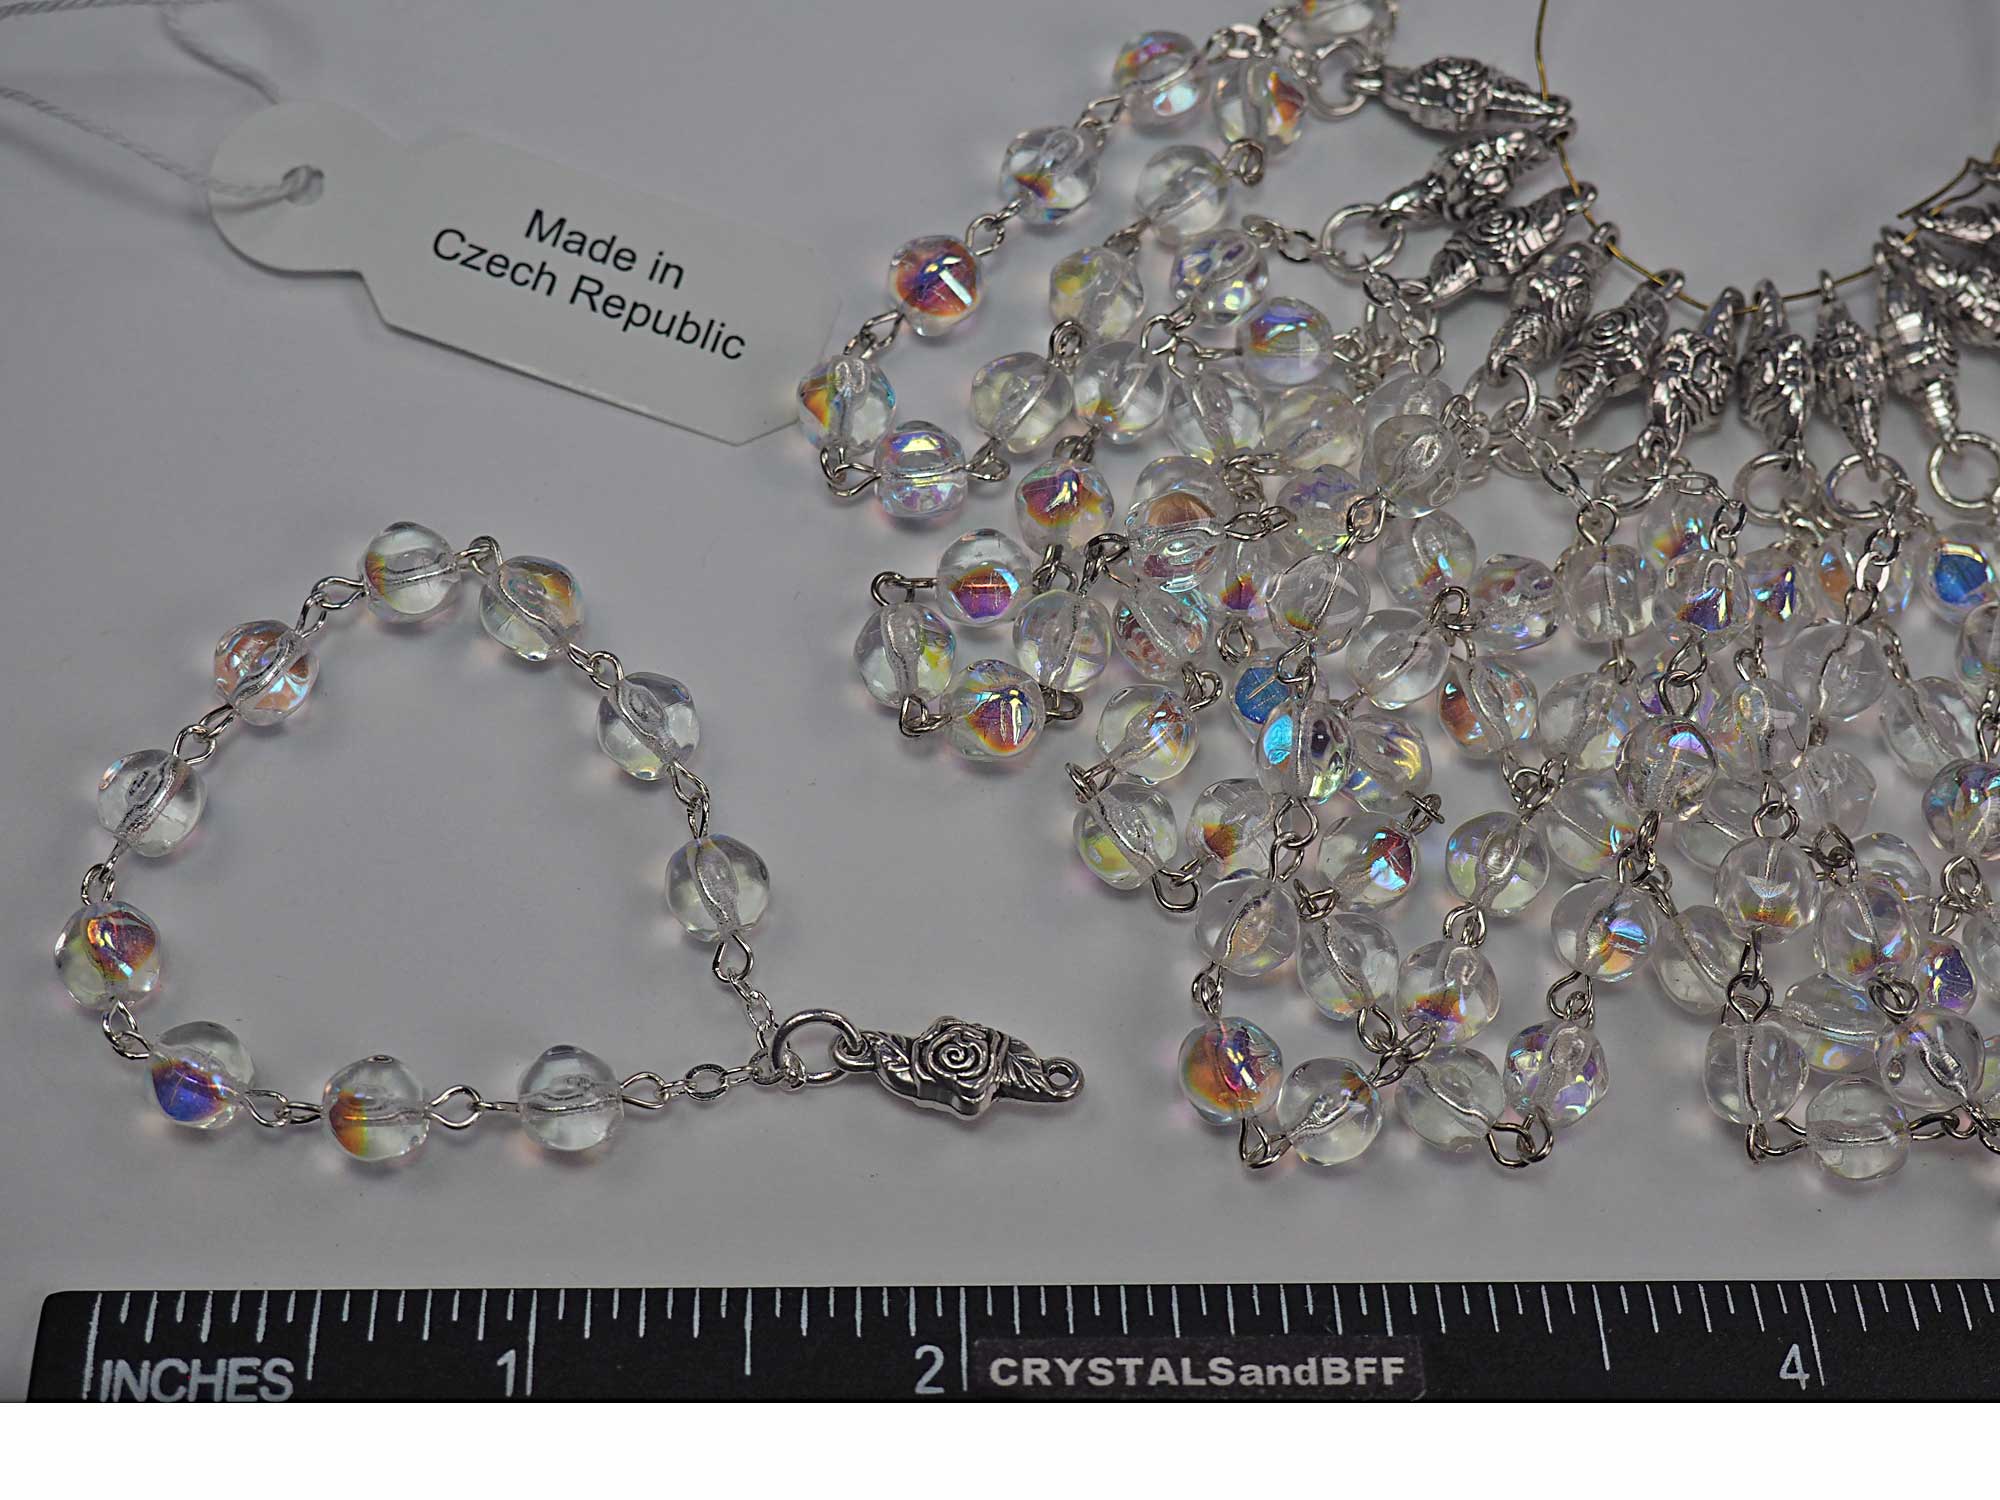 Rosary Chain - Finger Auto Rosary chain with Centerpiece, 6mm Druk Crystal AB coated Beads, Silver Plated, P574